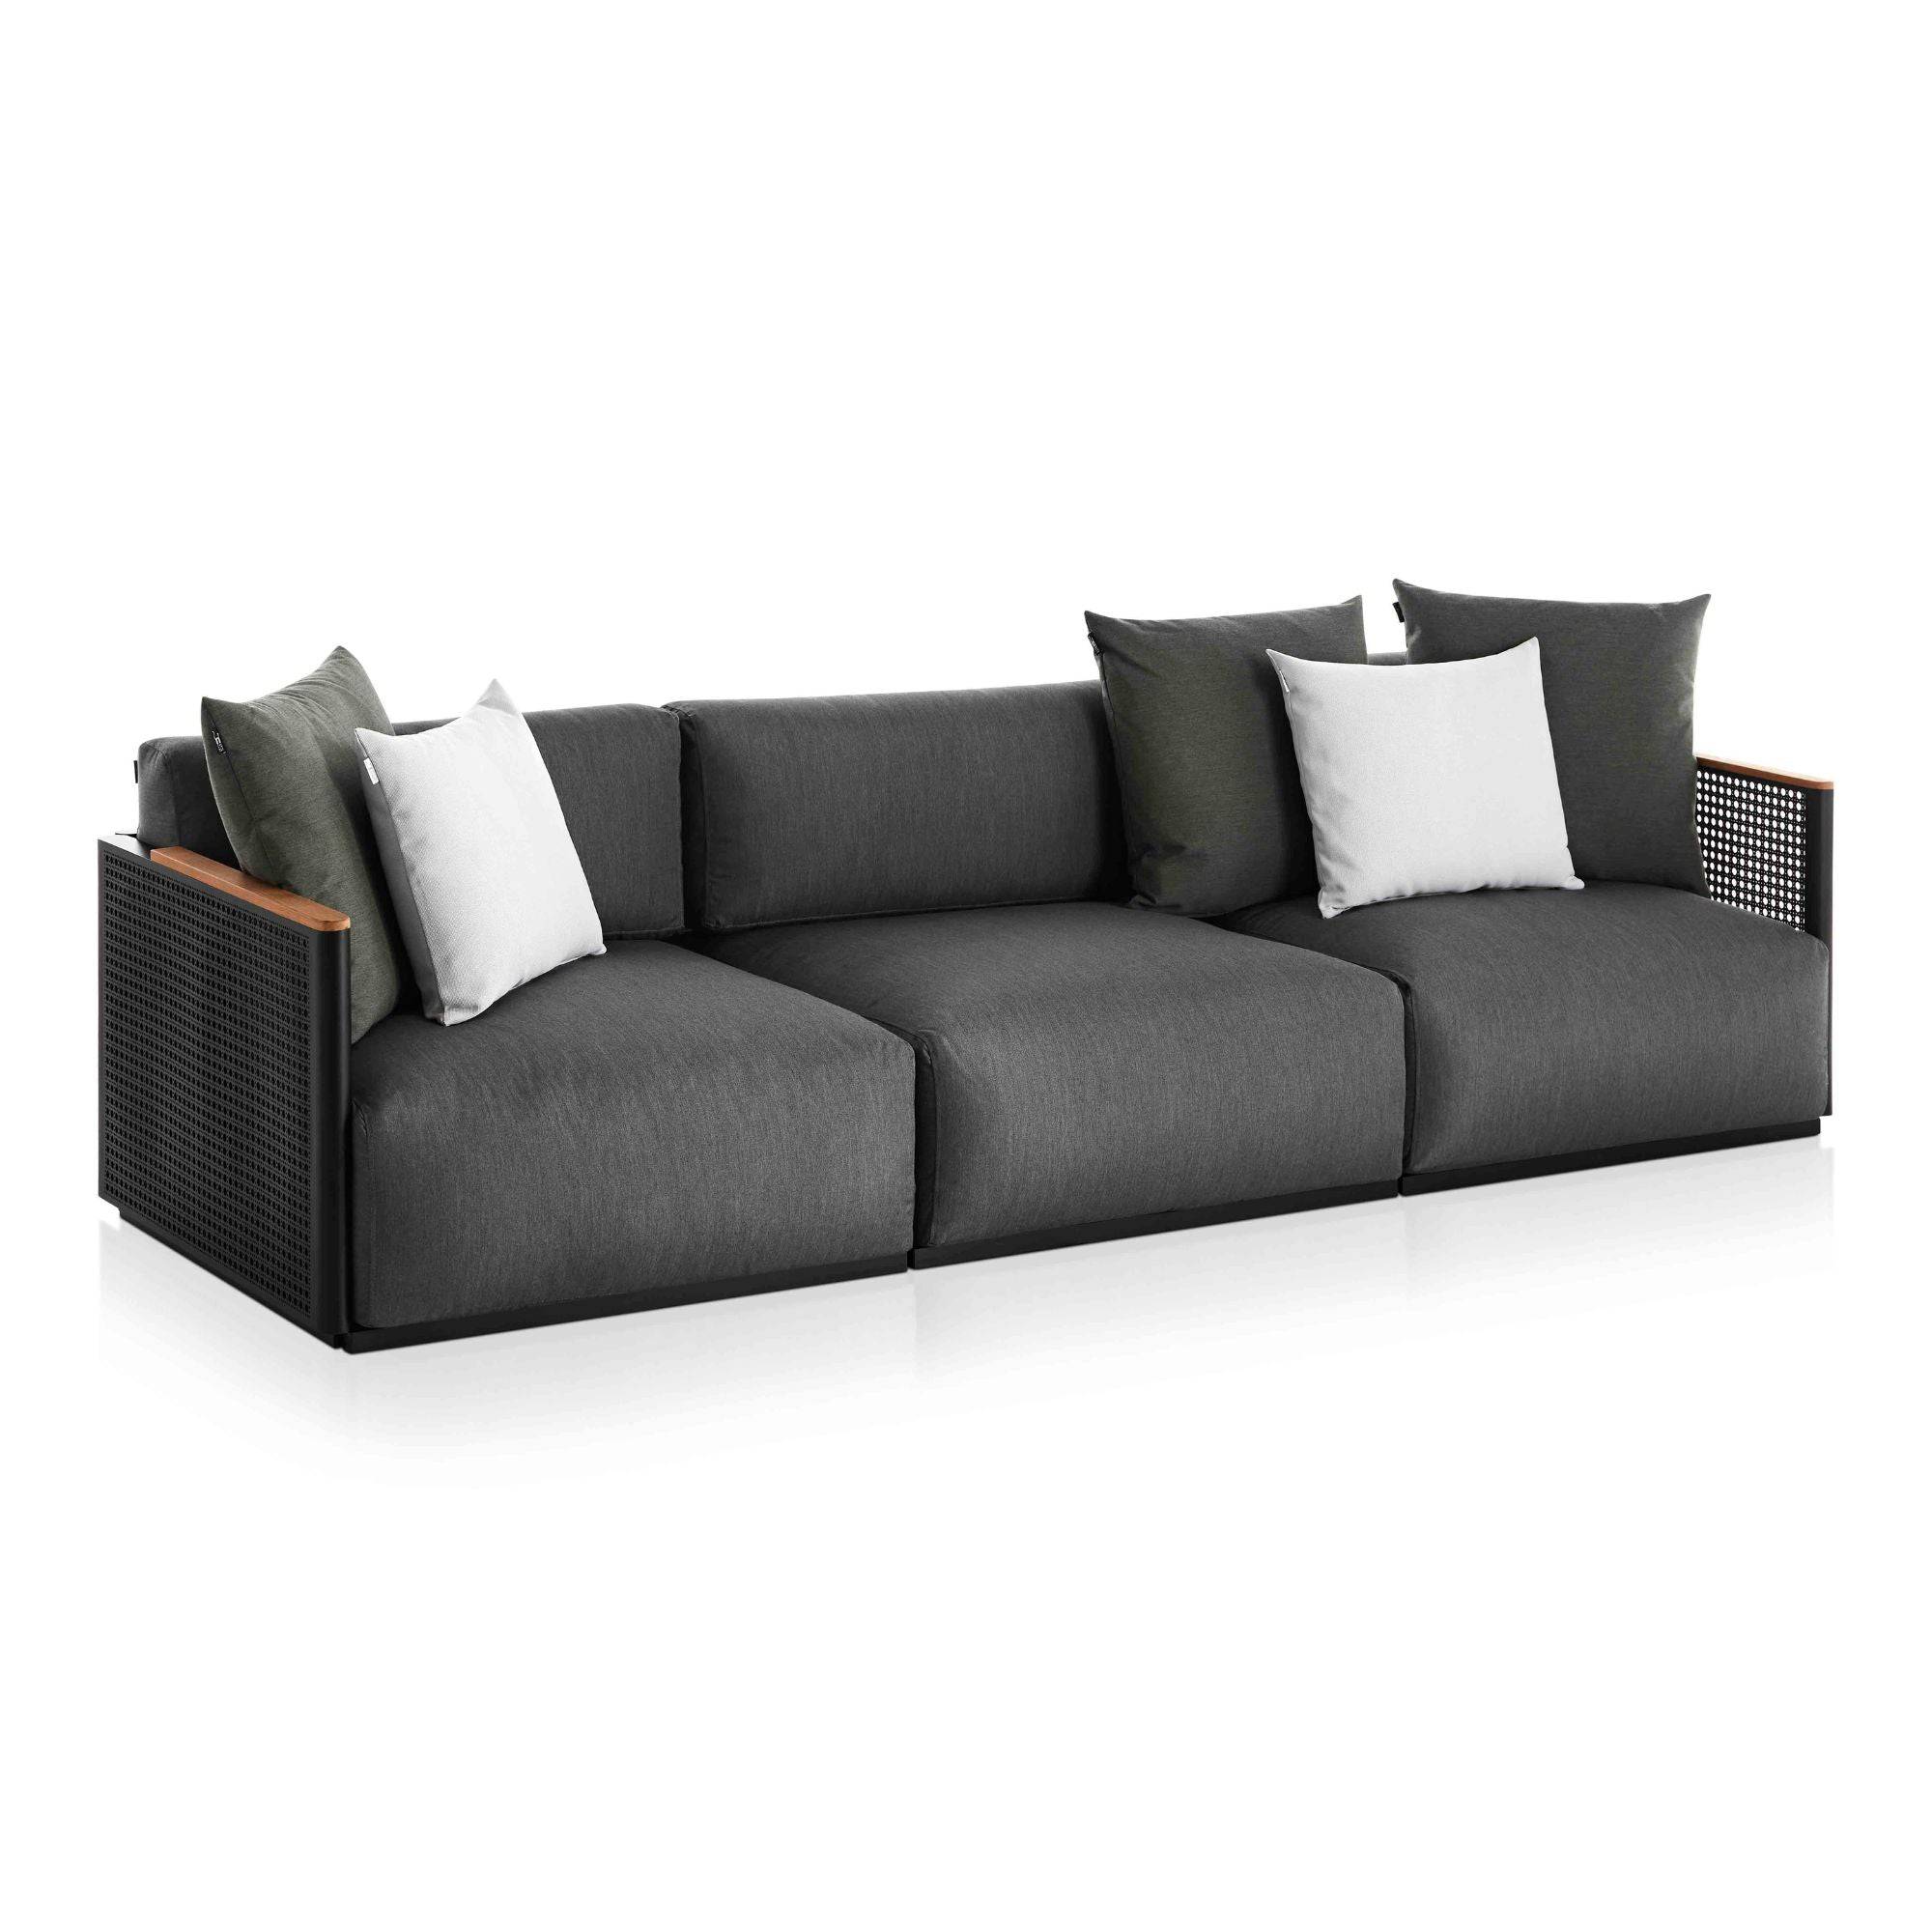 Bosc 3-Seater Sofa - THAT COOL LIVING